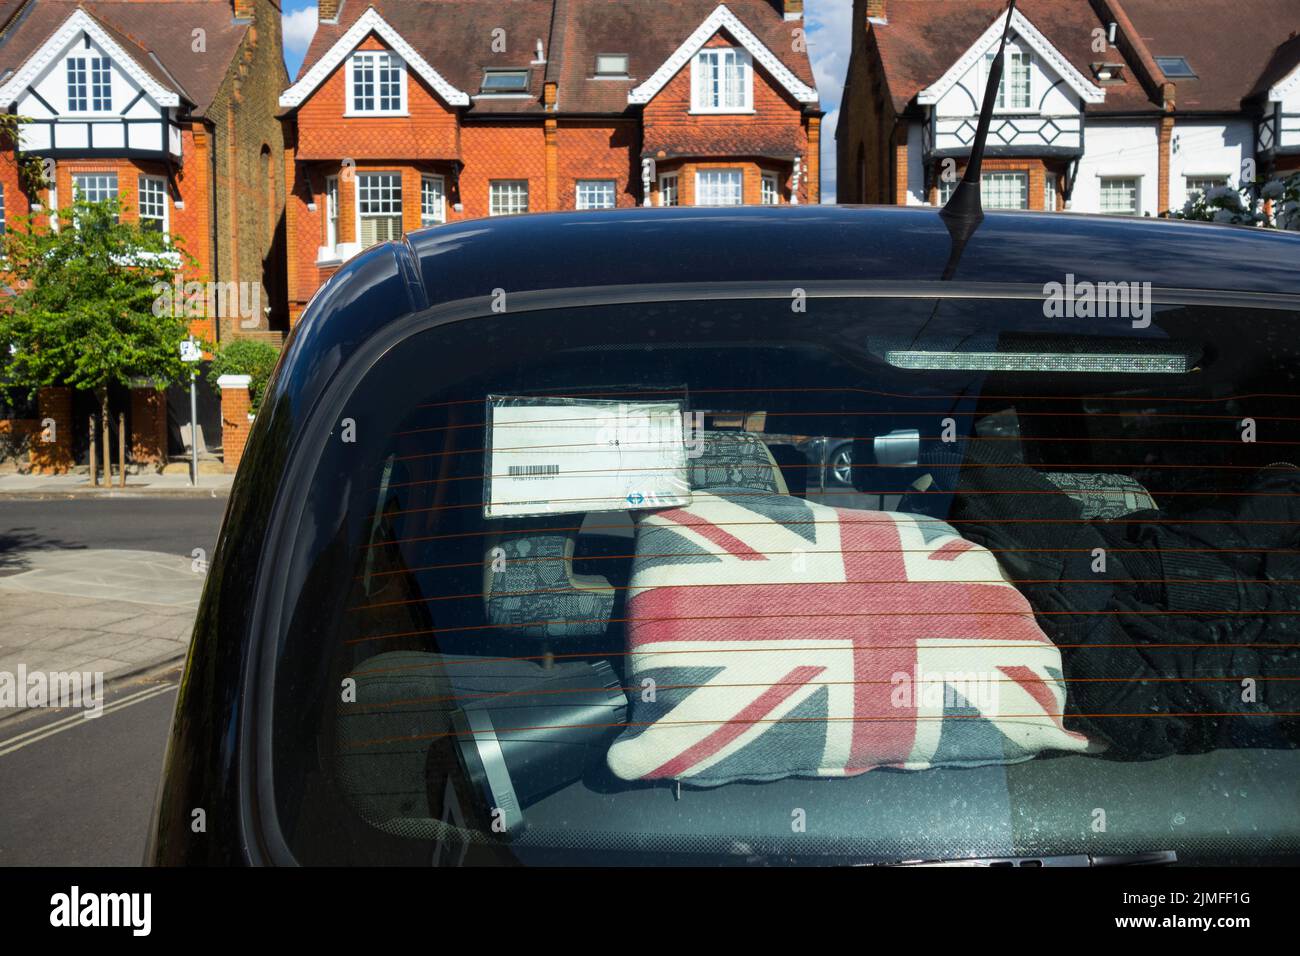 Closeup of a Union Jack cushion in the rear window of a London Black Taxi Cab Stock Photo